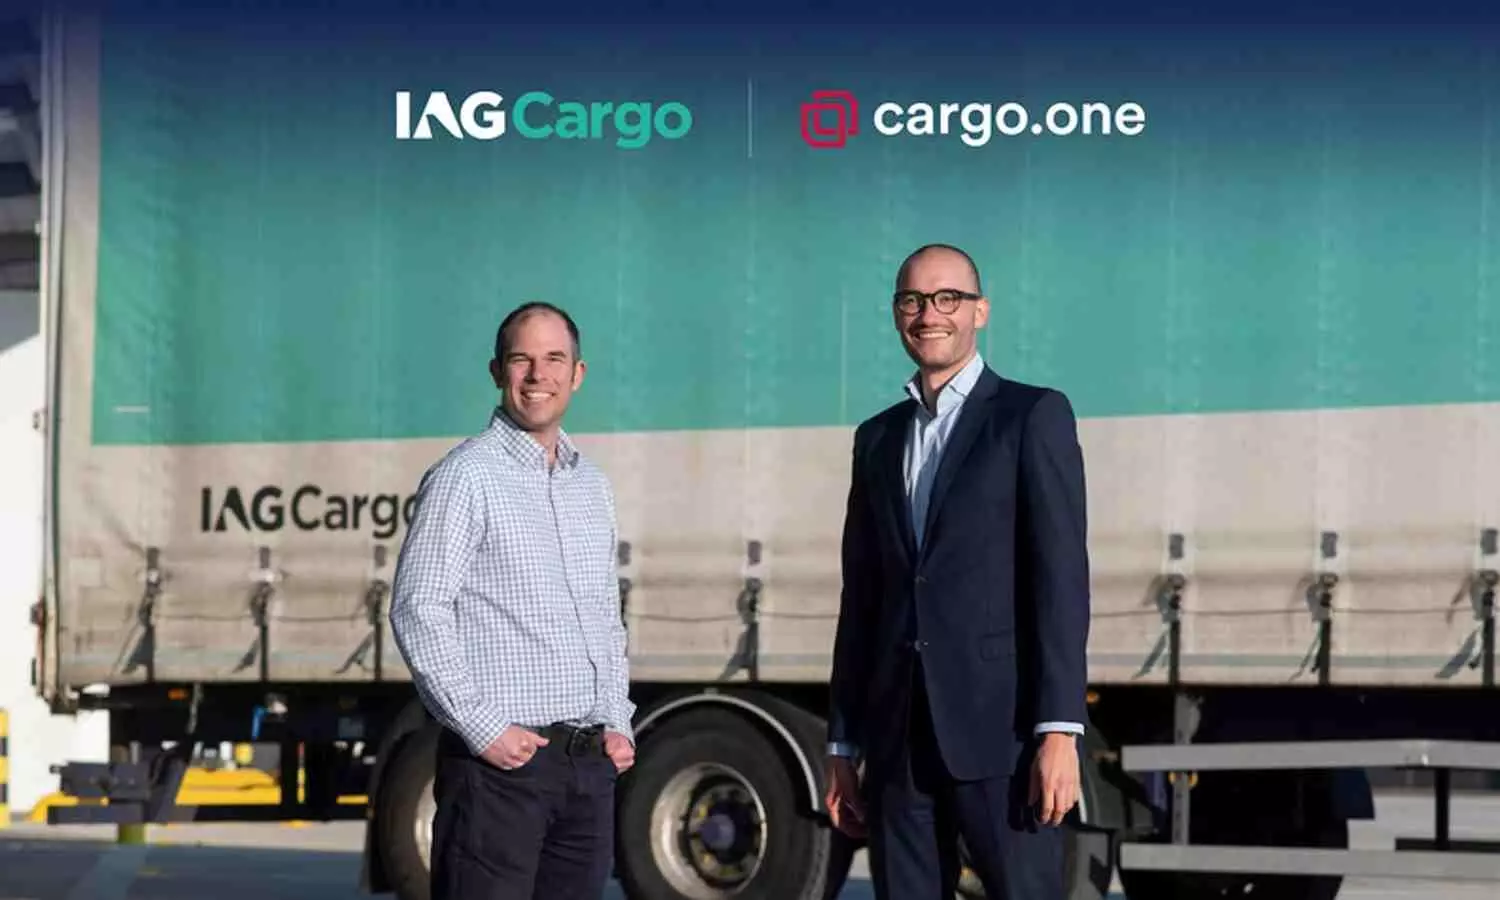 Peter Roberts, Head of Distribution, IAG Cargo and Moritz Claussen, founder & co-CEO, cargo.one